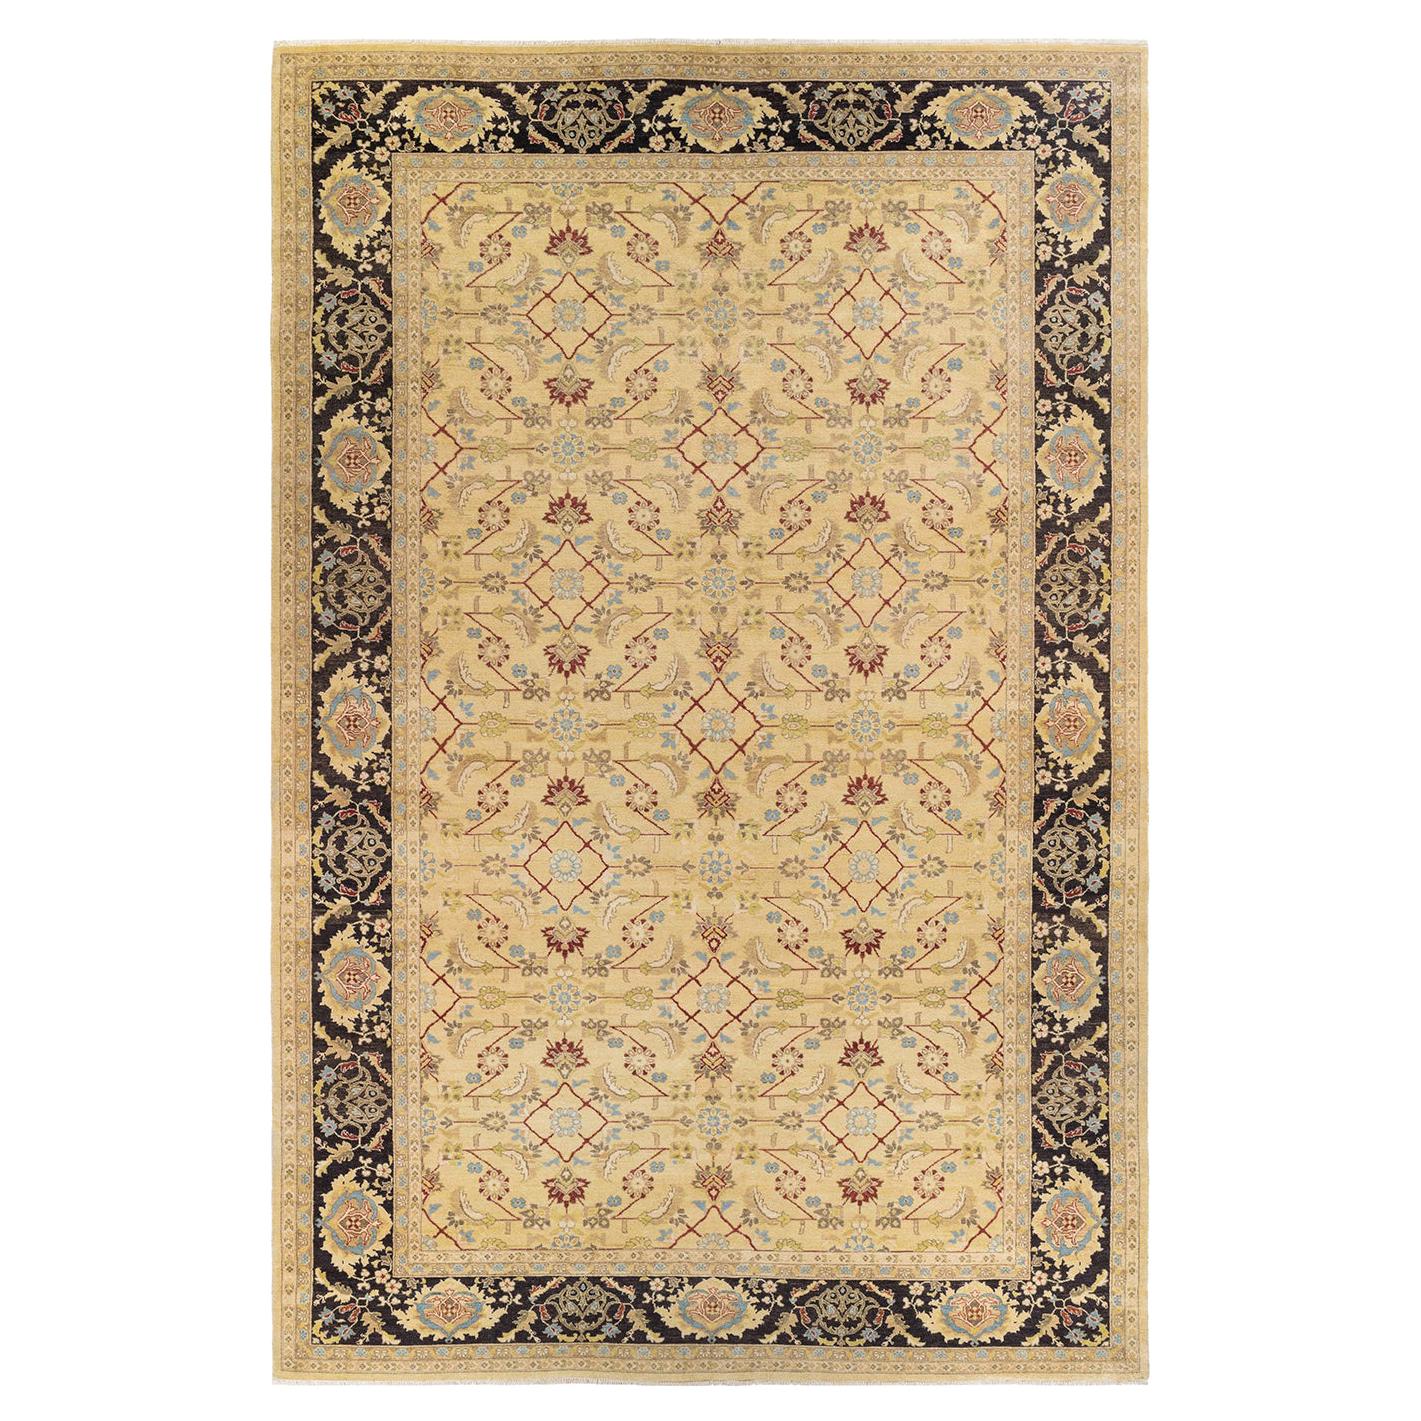 Eclectic, One-of-a-Kind Hand-Knotted Area Rug, Green